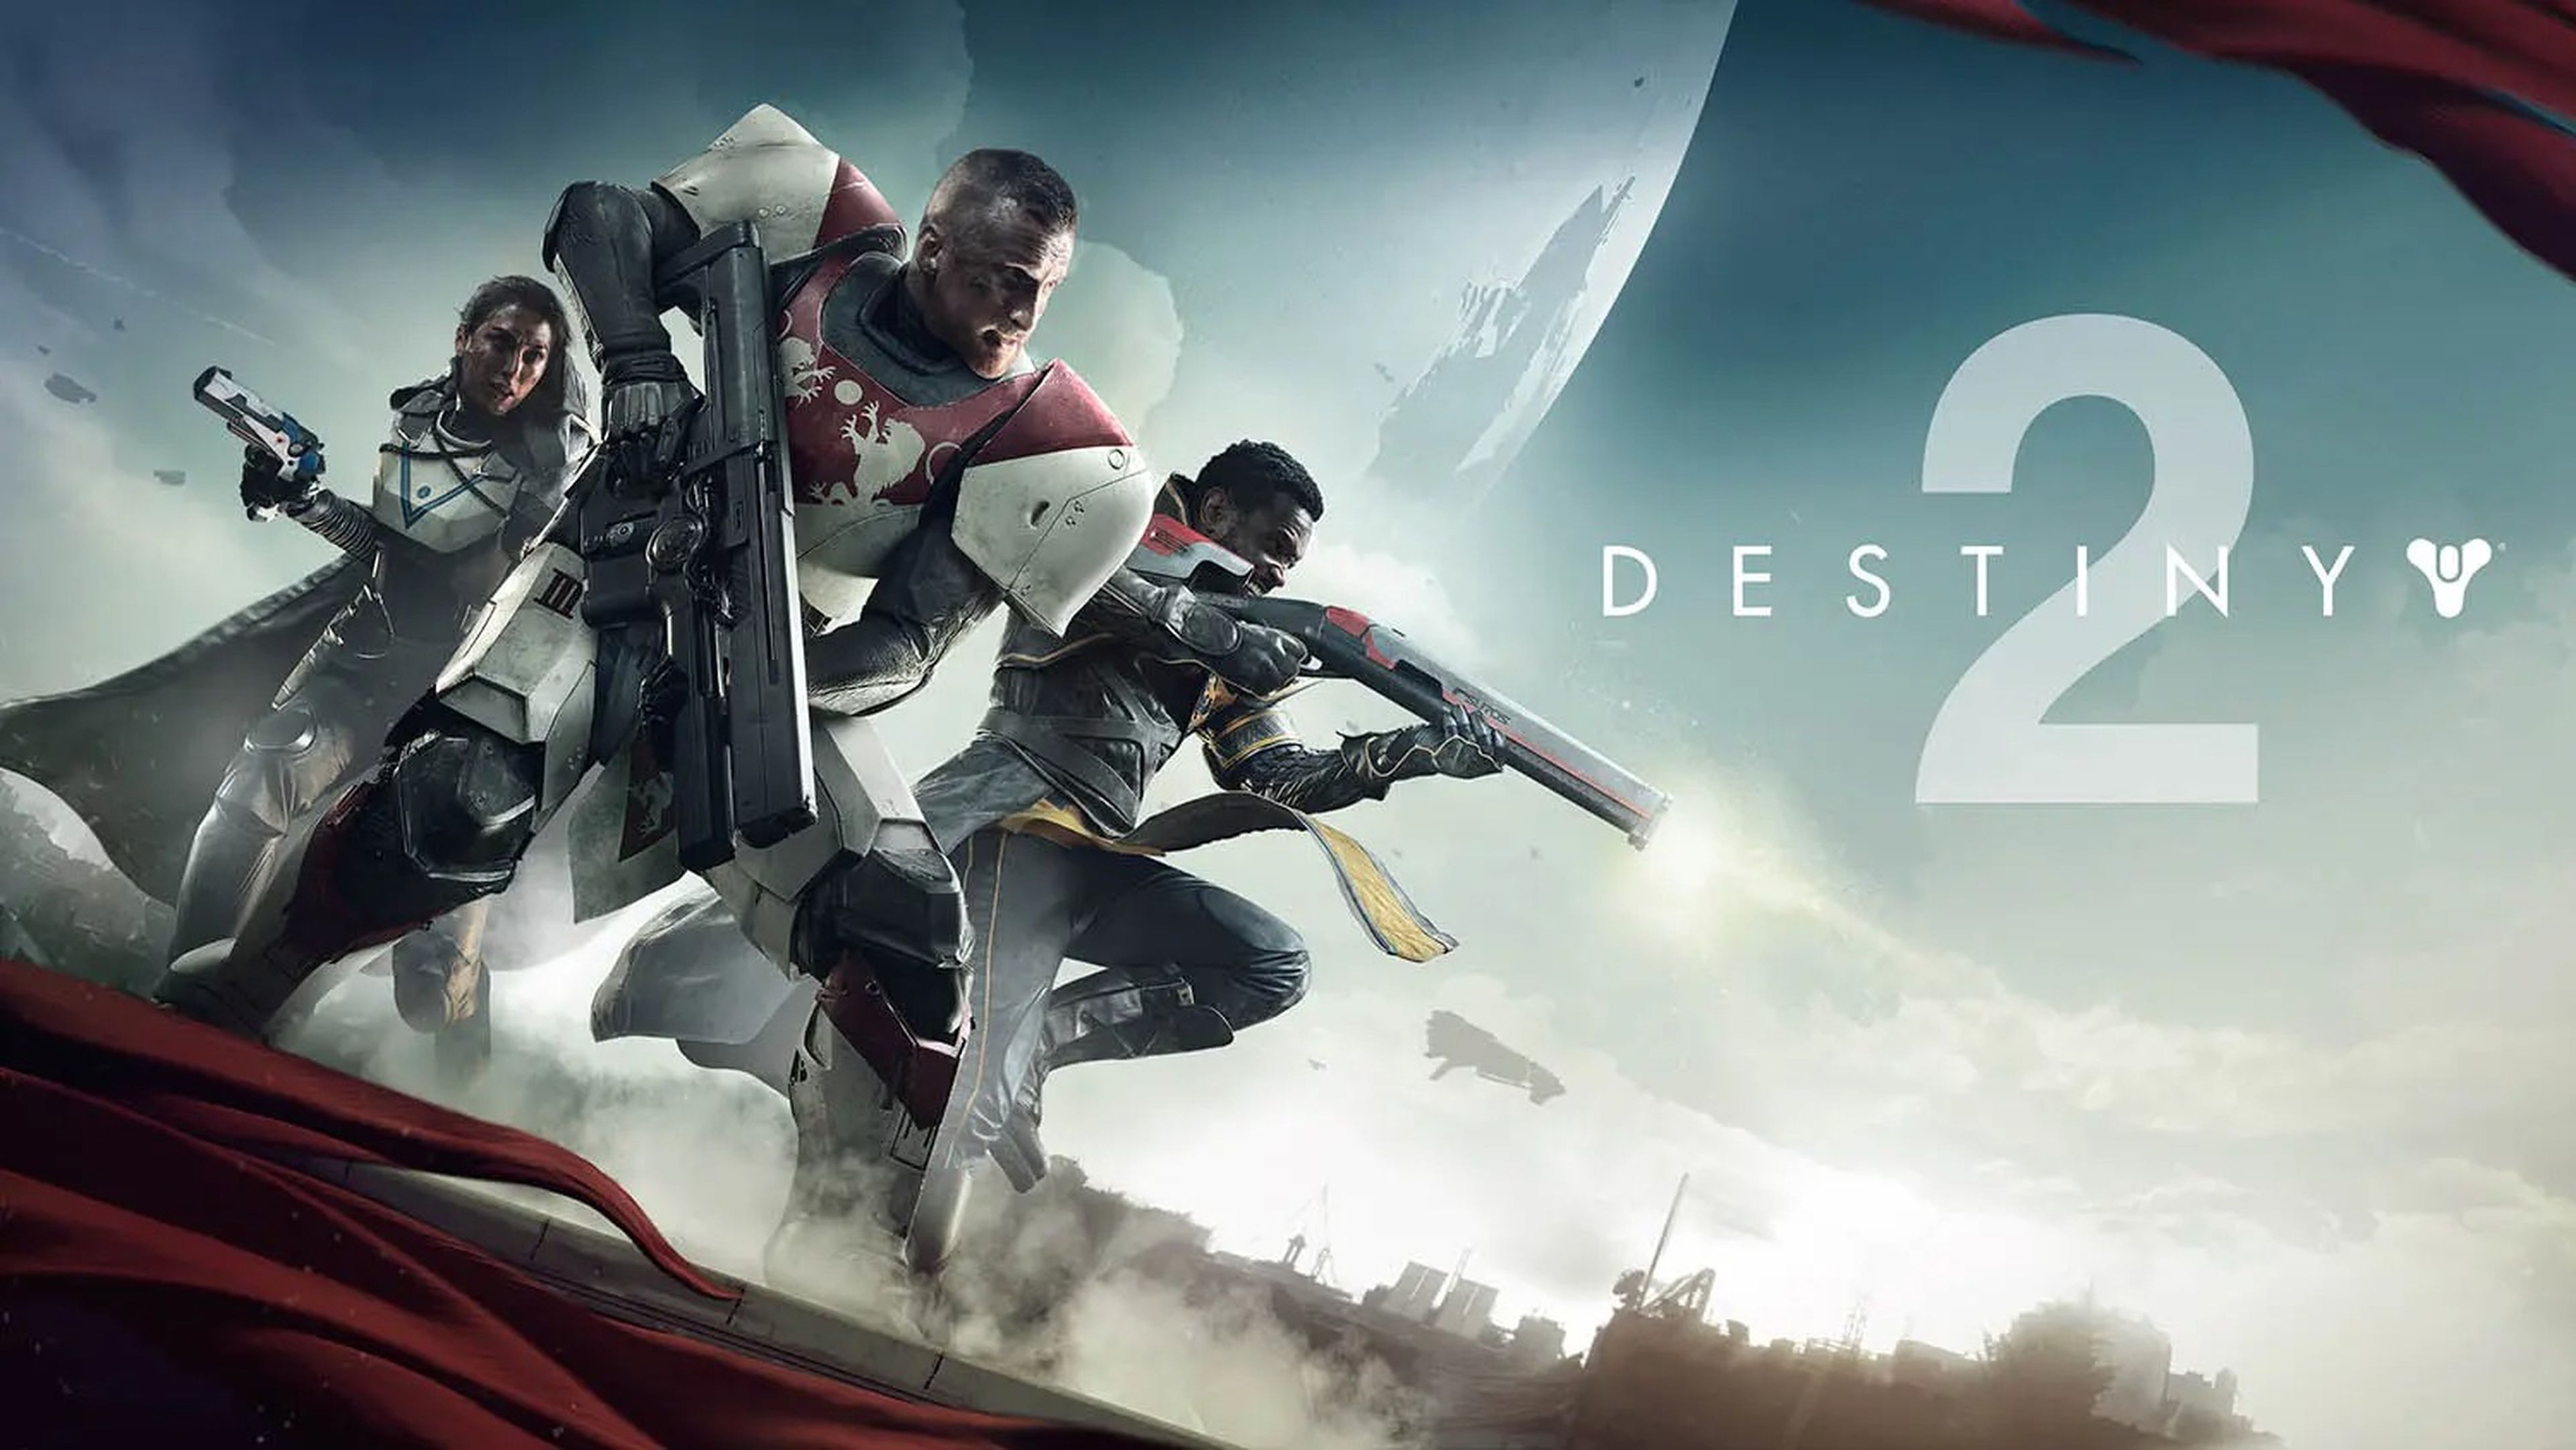 A promotional image for Bungie's biggest game, "Destiny 2."